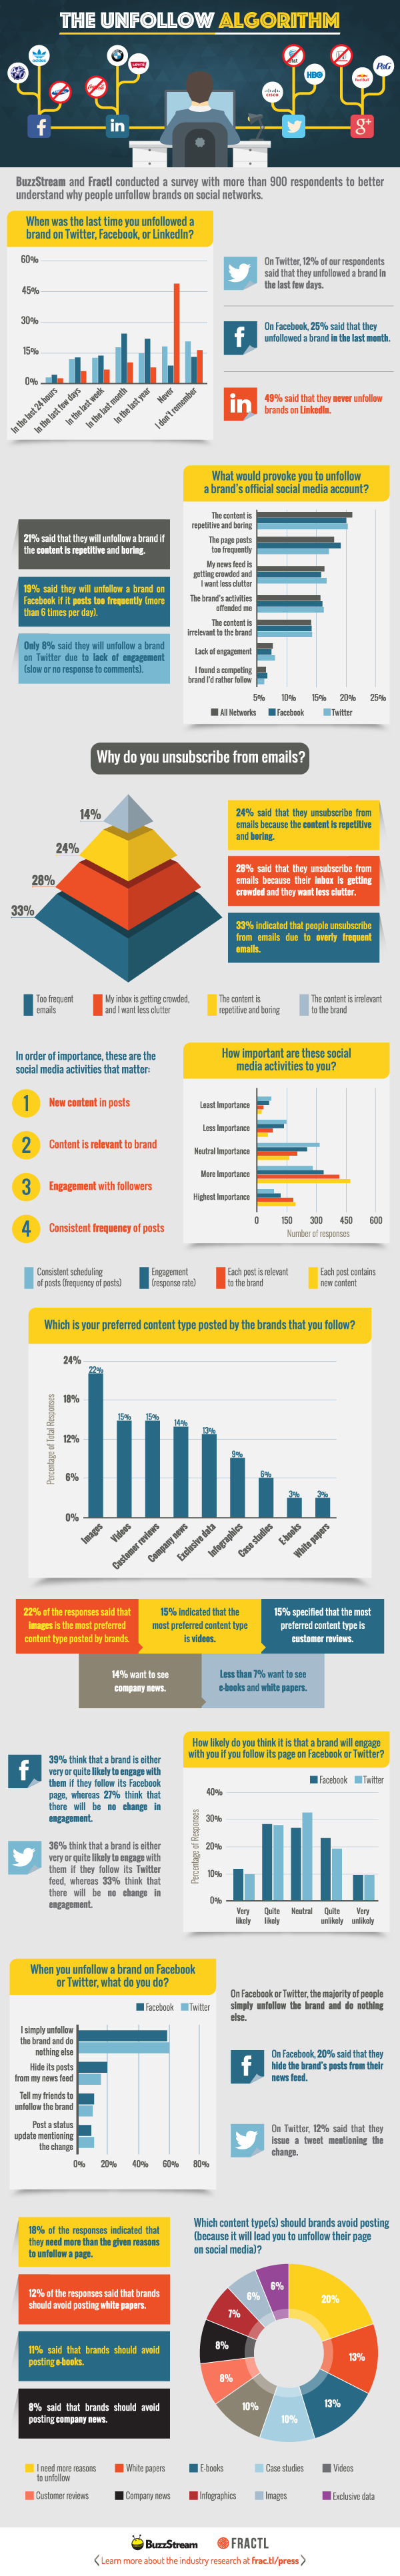 Why People Unfollow Brands on Social Media [Infographic]